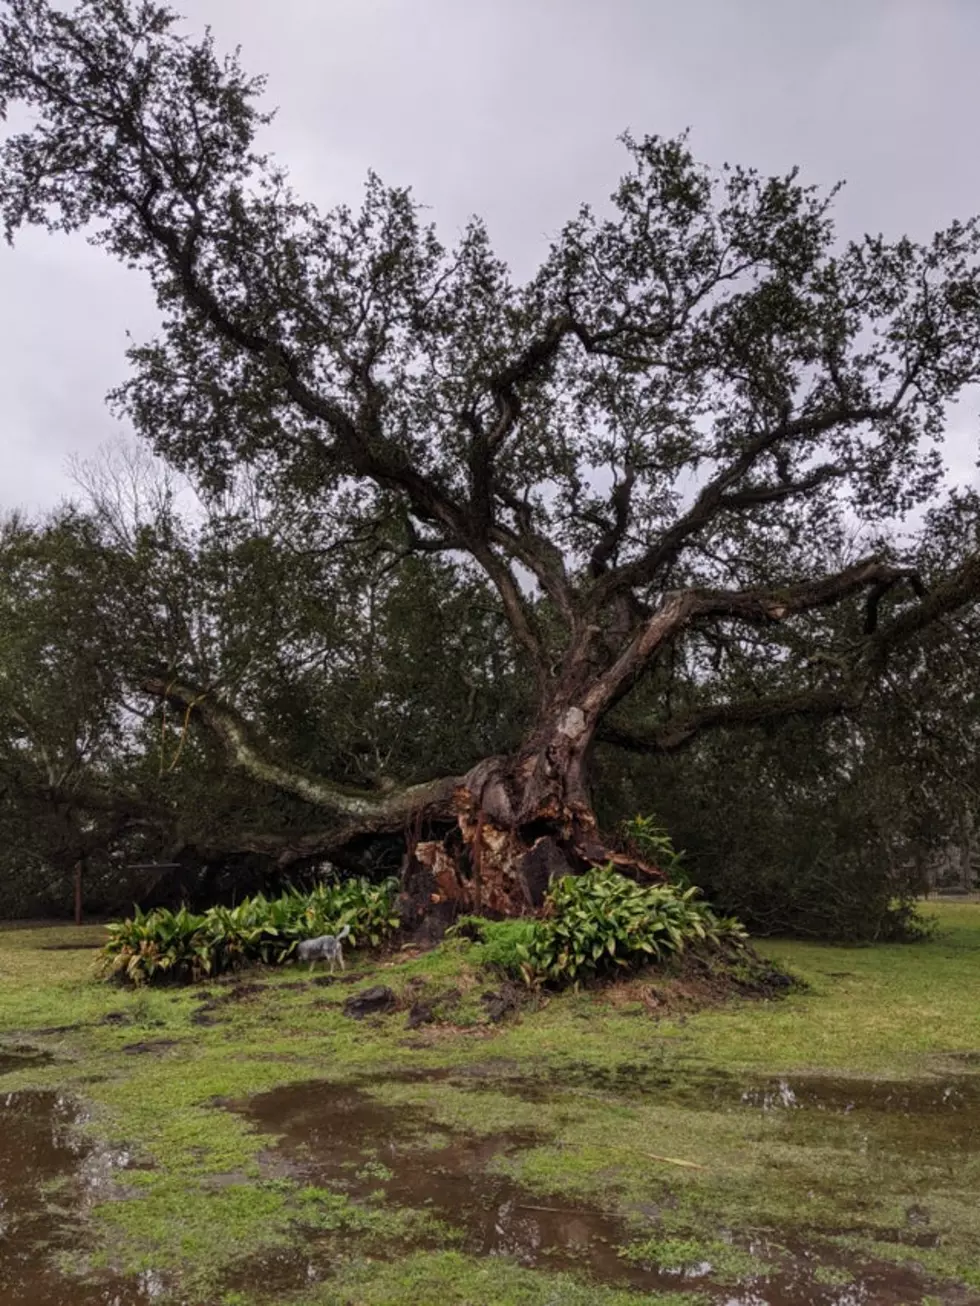 Storm Damages 500-Year-Old Oak Tree in Broussard [PHOTOS]